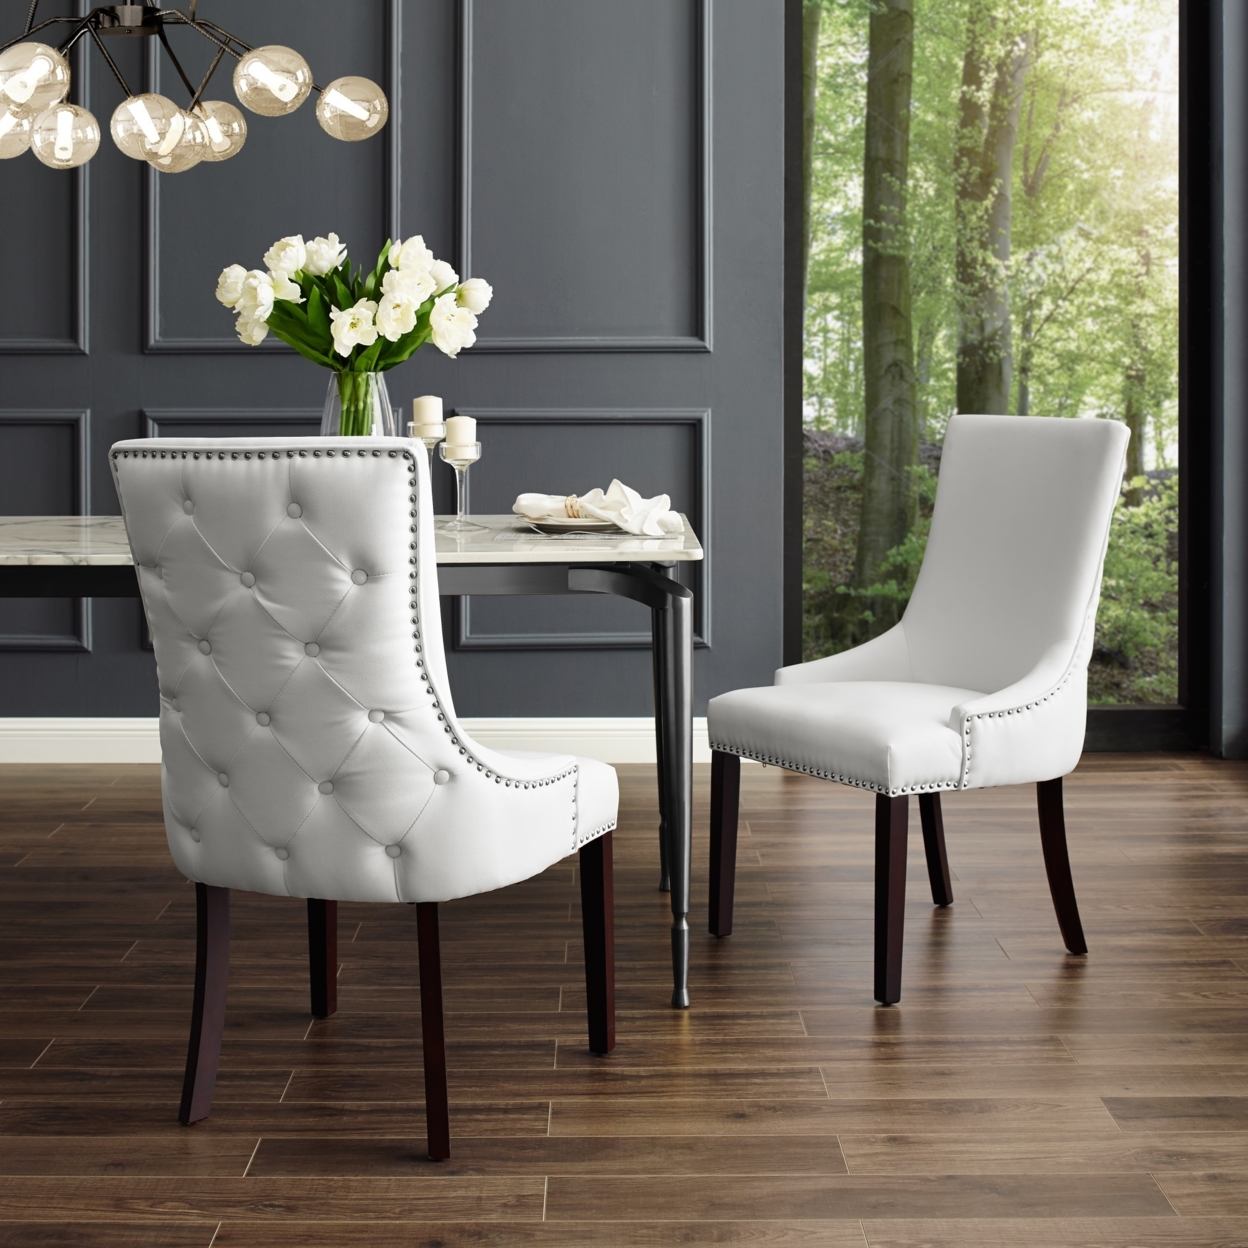 Ruben Leather PU Or Velvet Or Linen Dining Chair-Set Of 2-Tufted-Nailhead Trim By Inspired Home - Cream White Linen